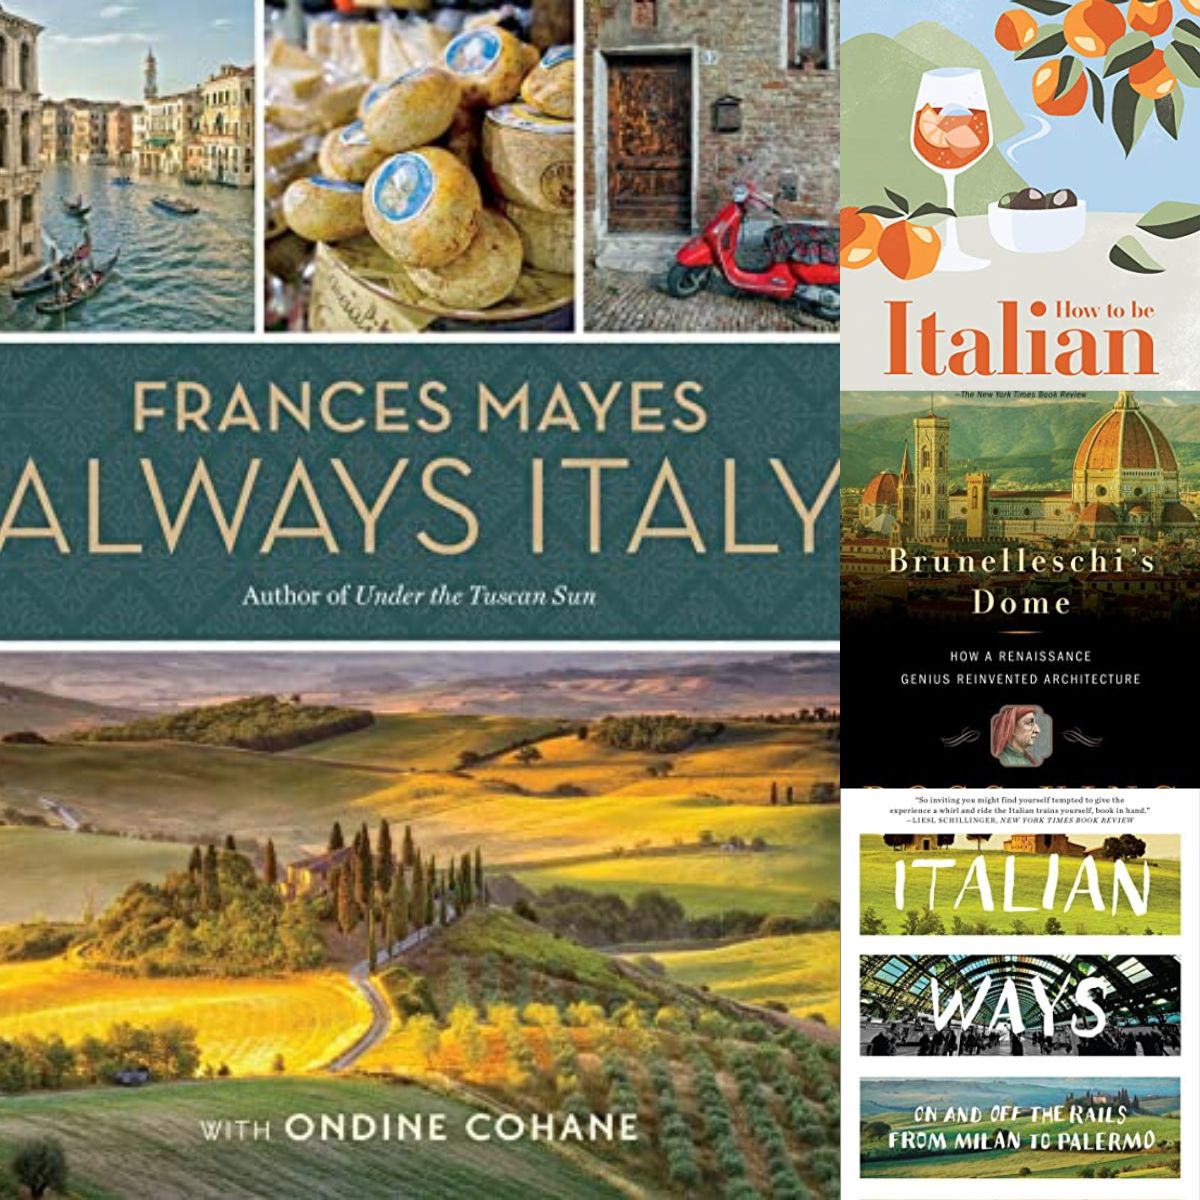 20 Travel Books about Italy to Read Before You Go - Don't Just Fly